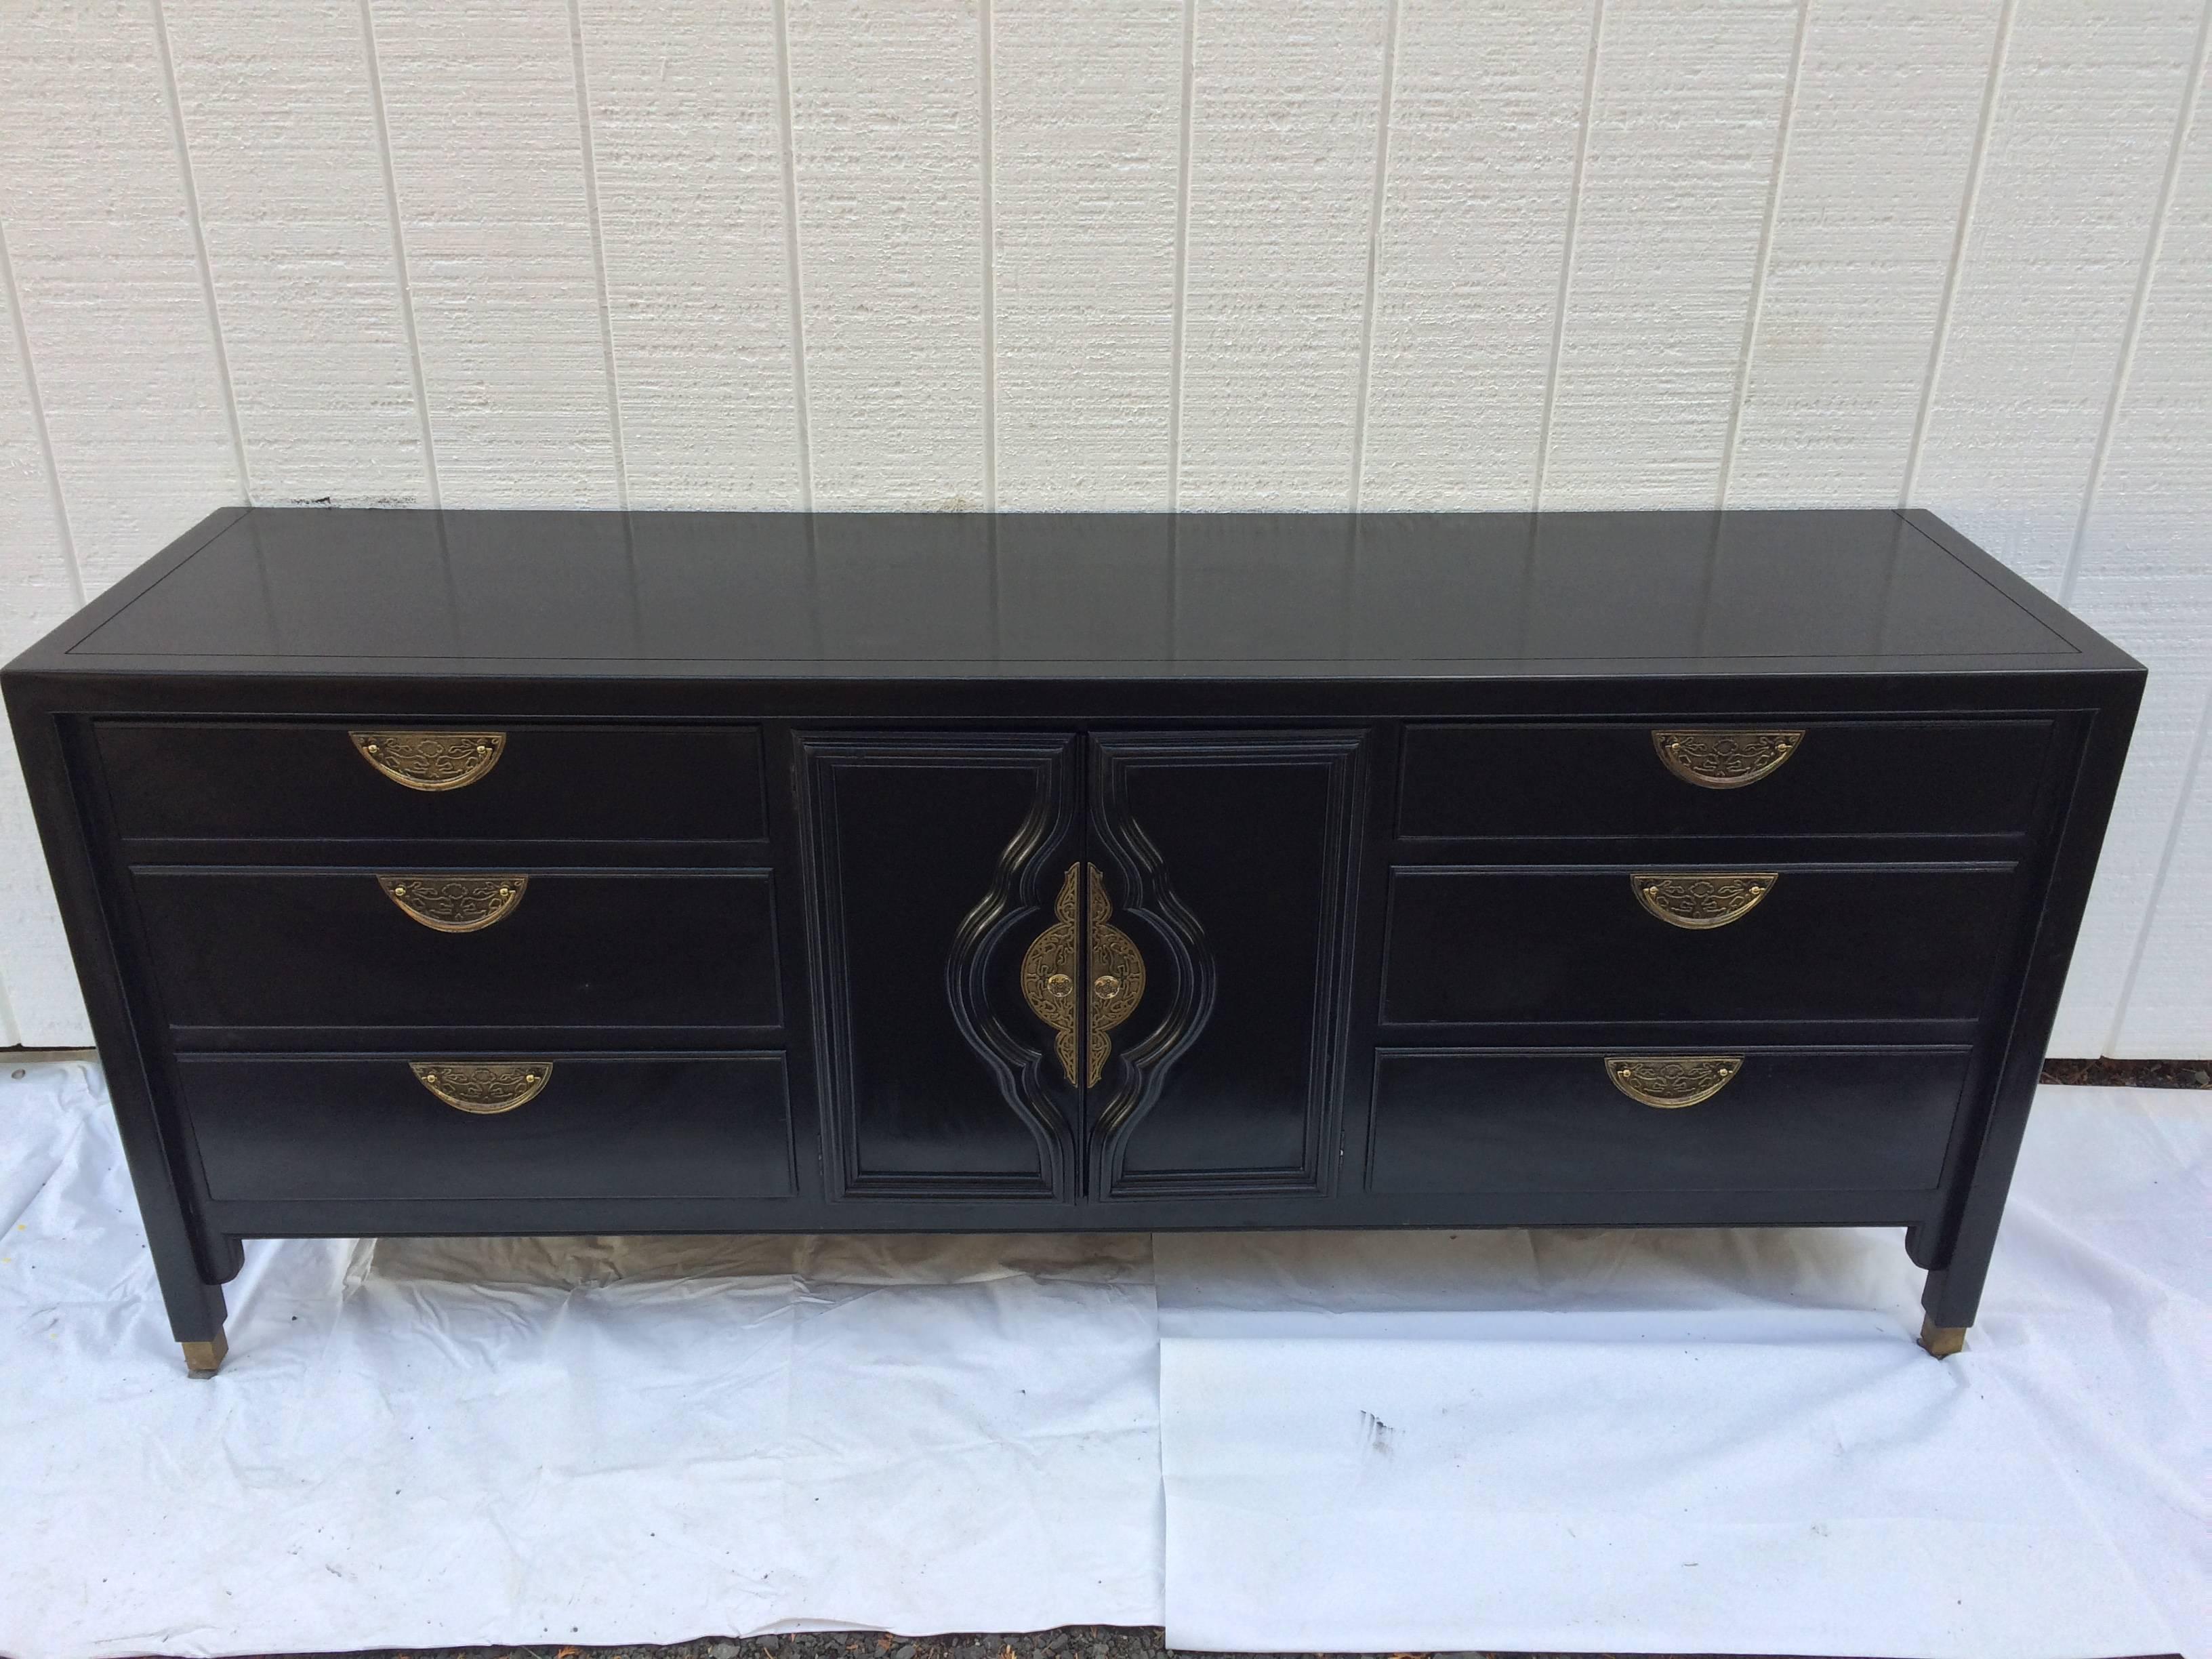 Hollywood Regency dresser in the style of James Mont for Century. Lots of storage to this solid wood black beauty. Gorgeous brass pulls make up this Classic piece. Matching mirror also available as well as nightstands.